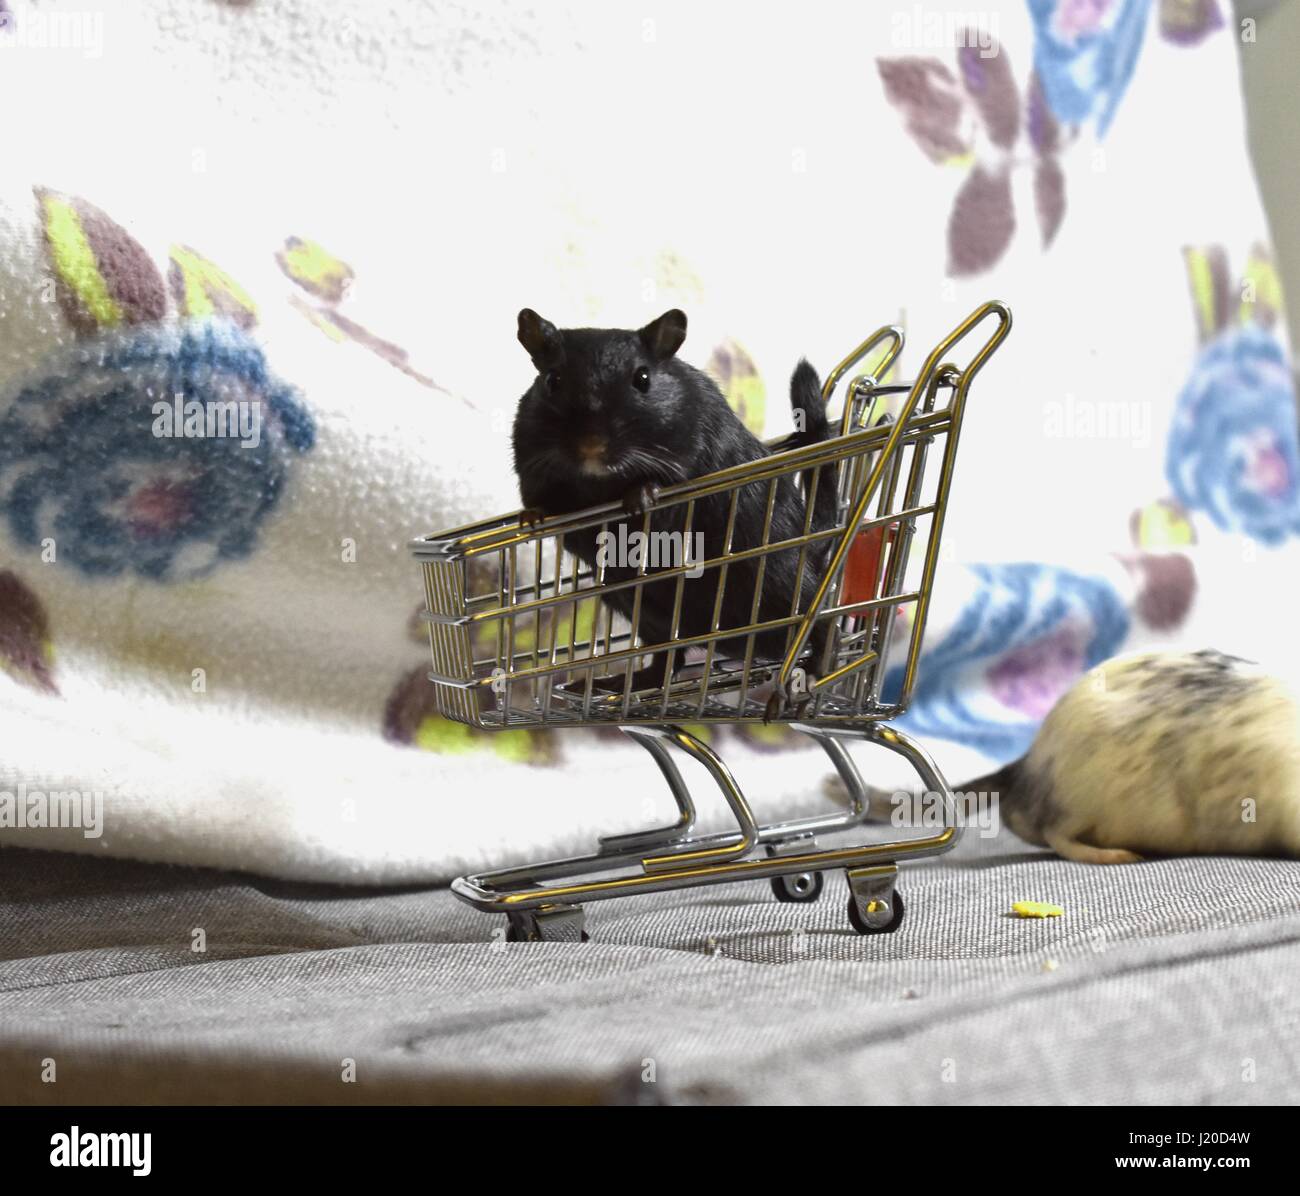 Black gerbil sitting in a miniature shopping trolley Stock Photo